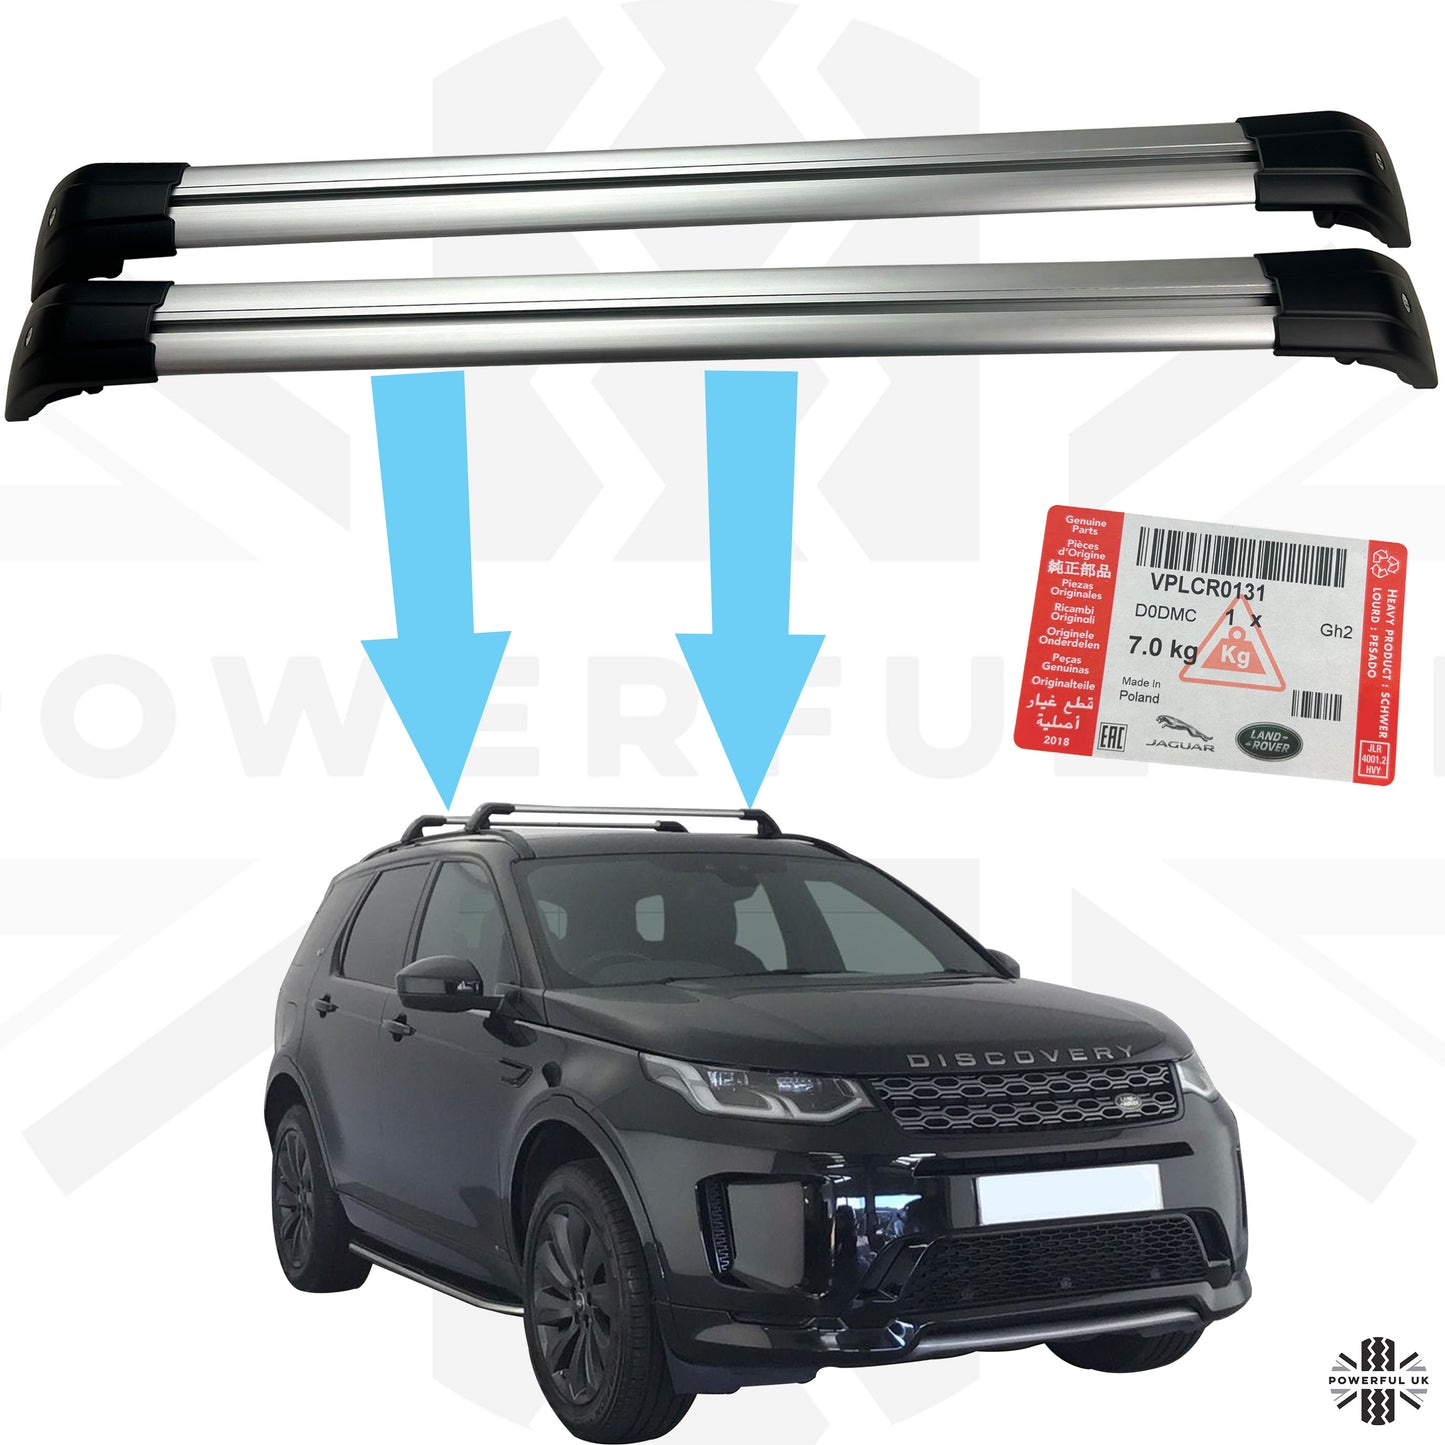 Genuine Roof Cross Bar Kit for Land Rover Discovery Sport